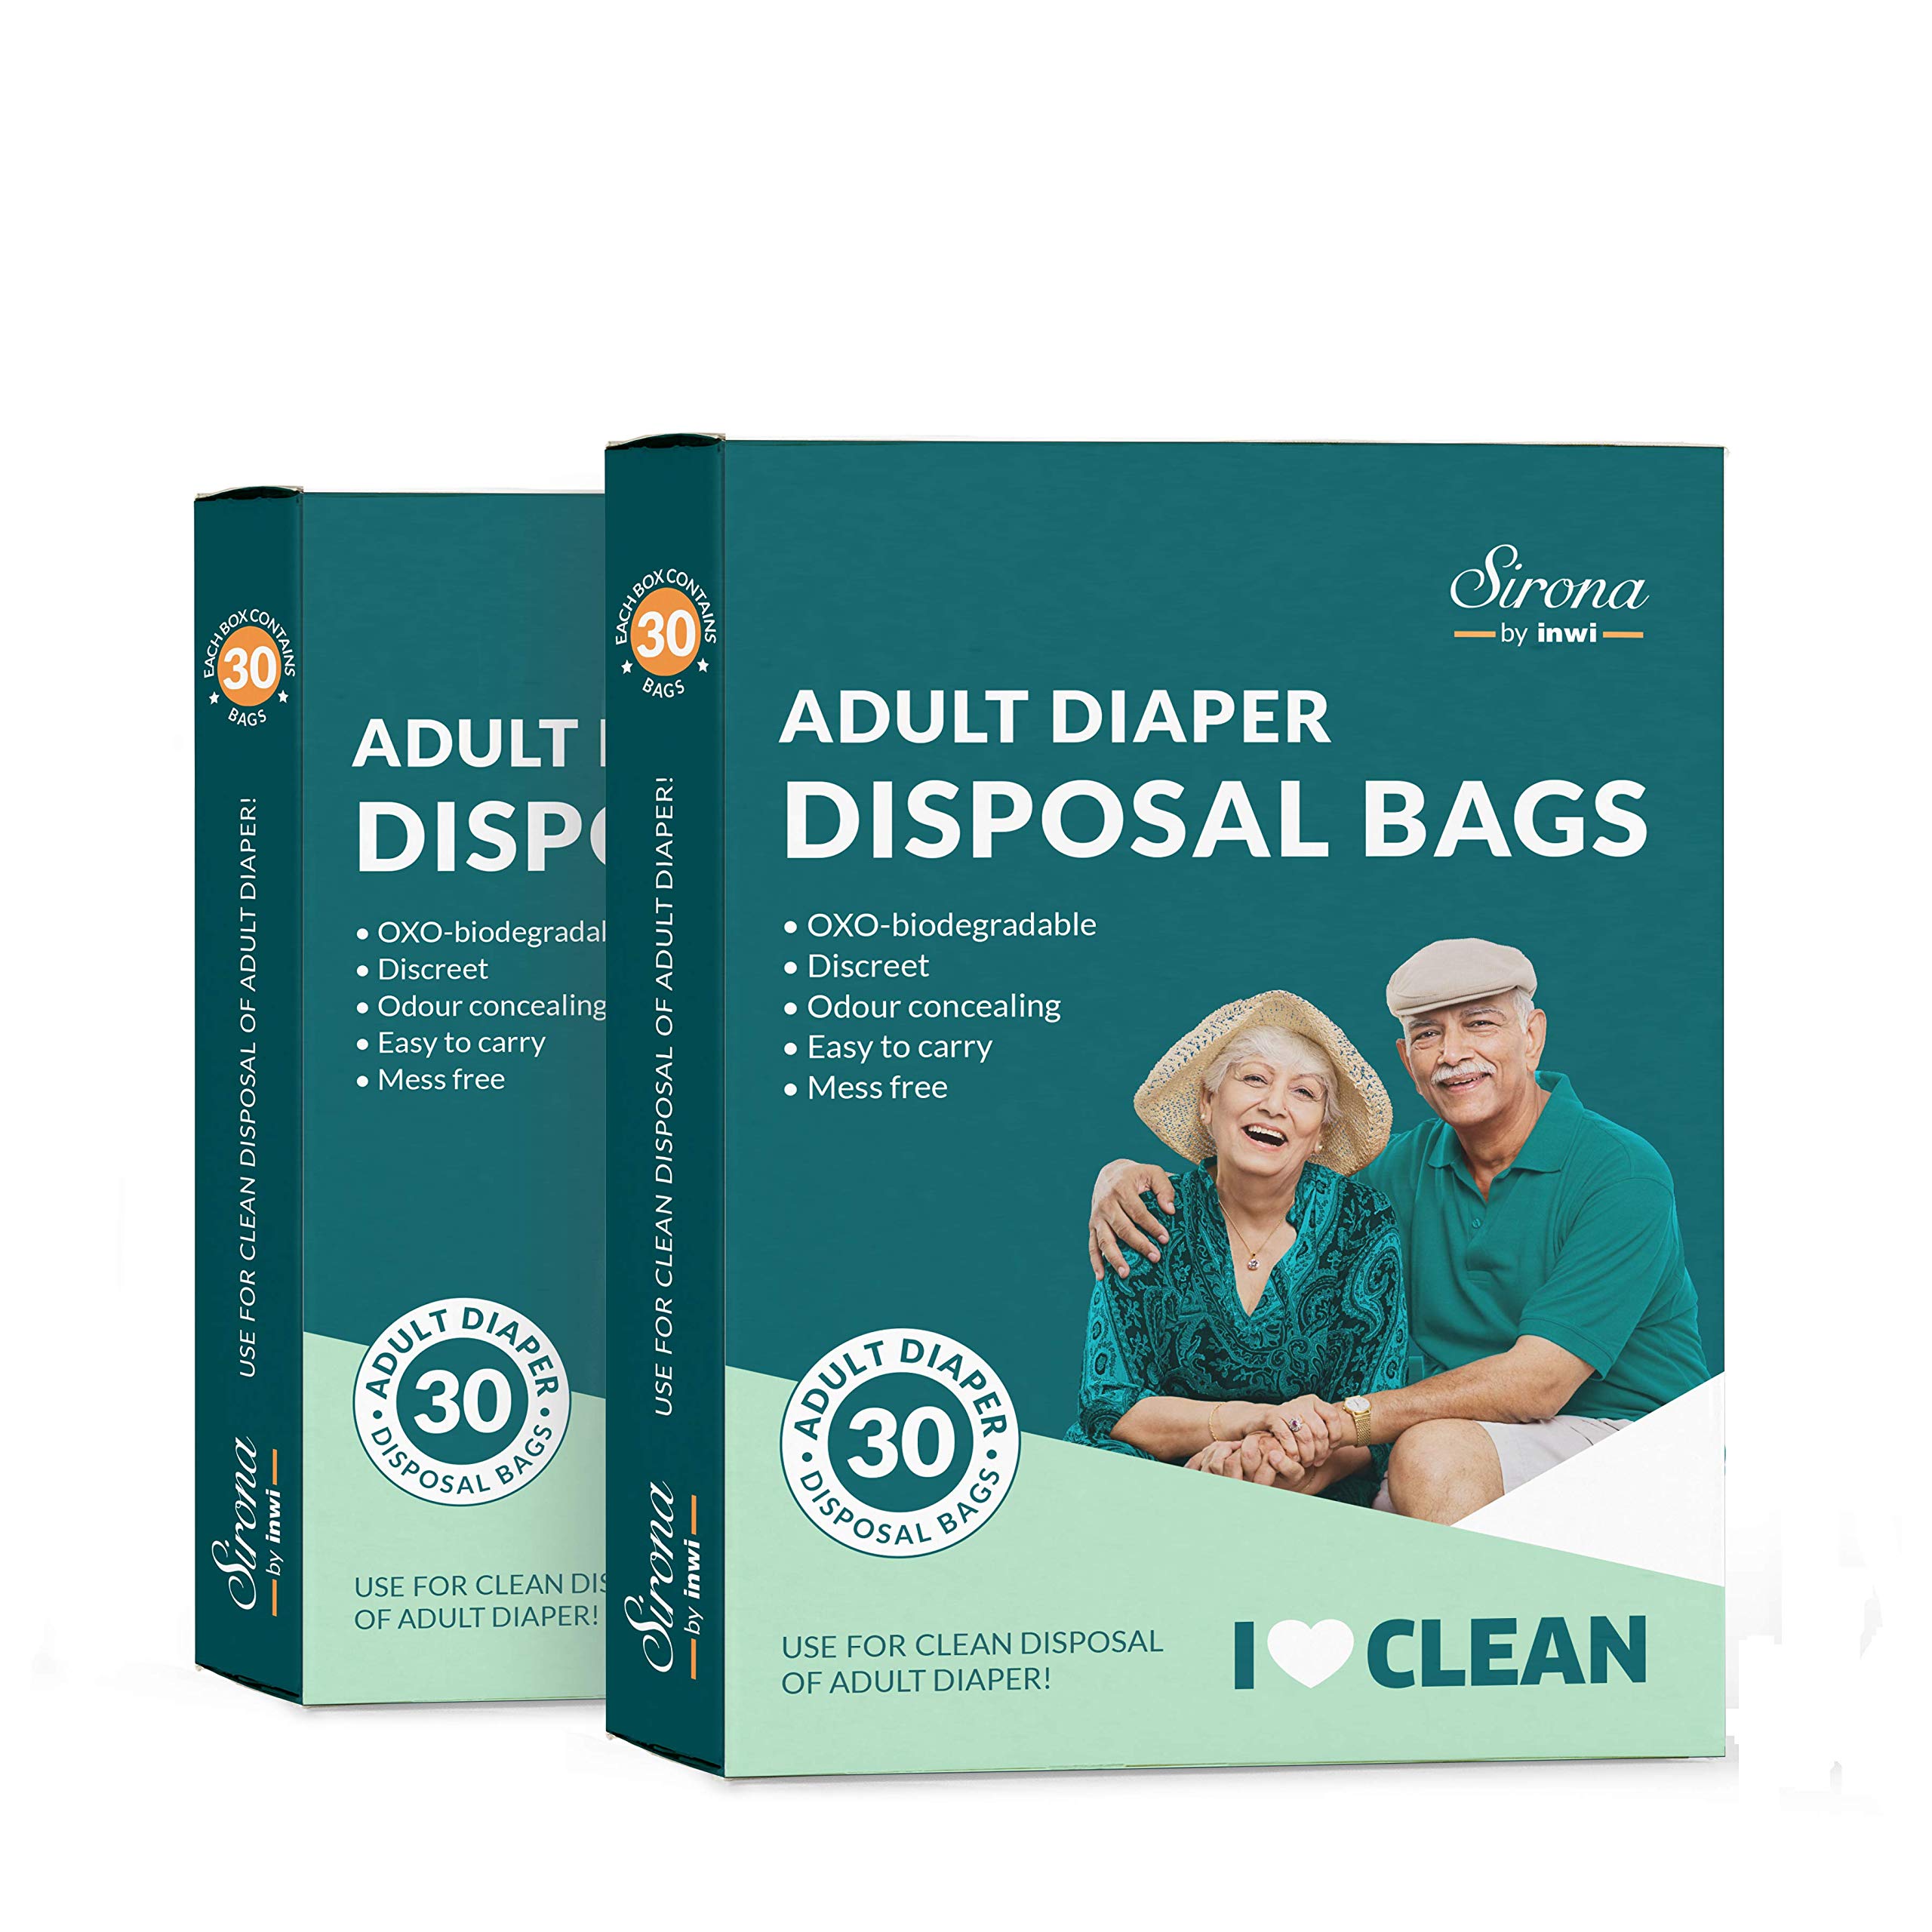 Sirona Premium Adult Diaper Disposal Bags - Pack of 60, Nature Friendly  Odor Sealing Bags for Discreet Disposal of Adult Diapers, Baby Diapers and  Feminine Hygiene Products